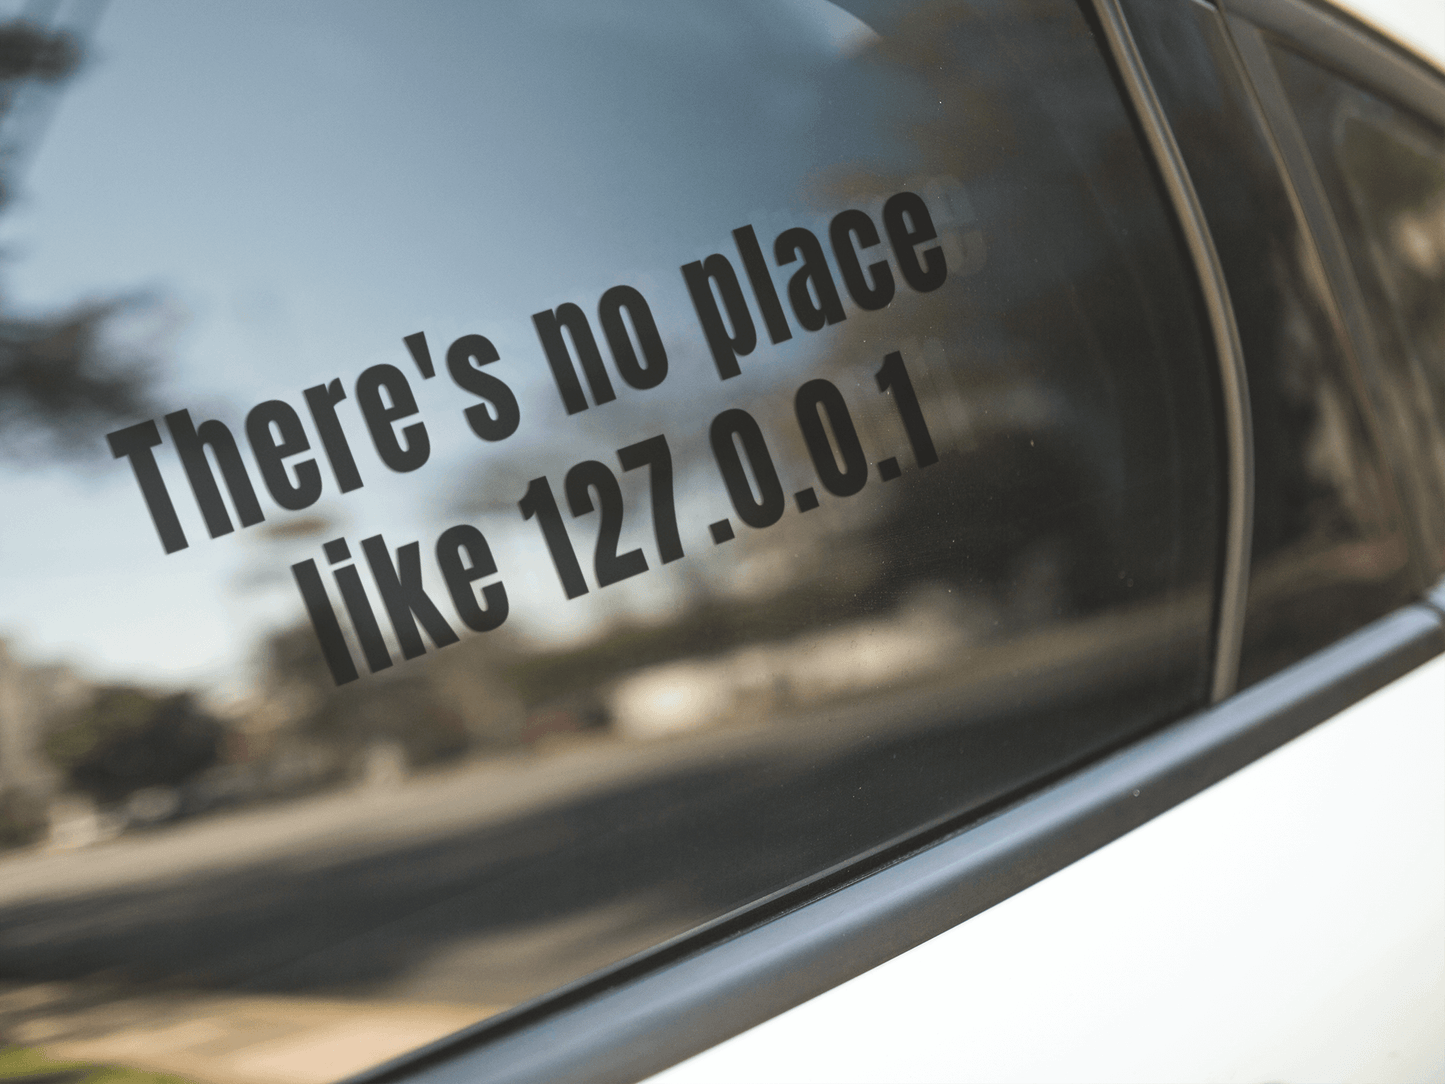 There is no place like 127.0.0.1- Vinyl Sticker